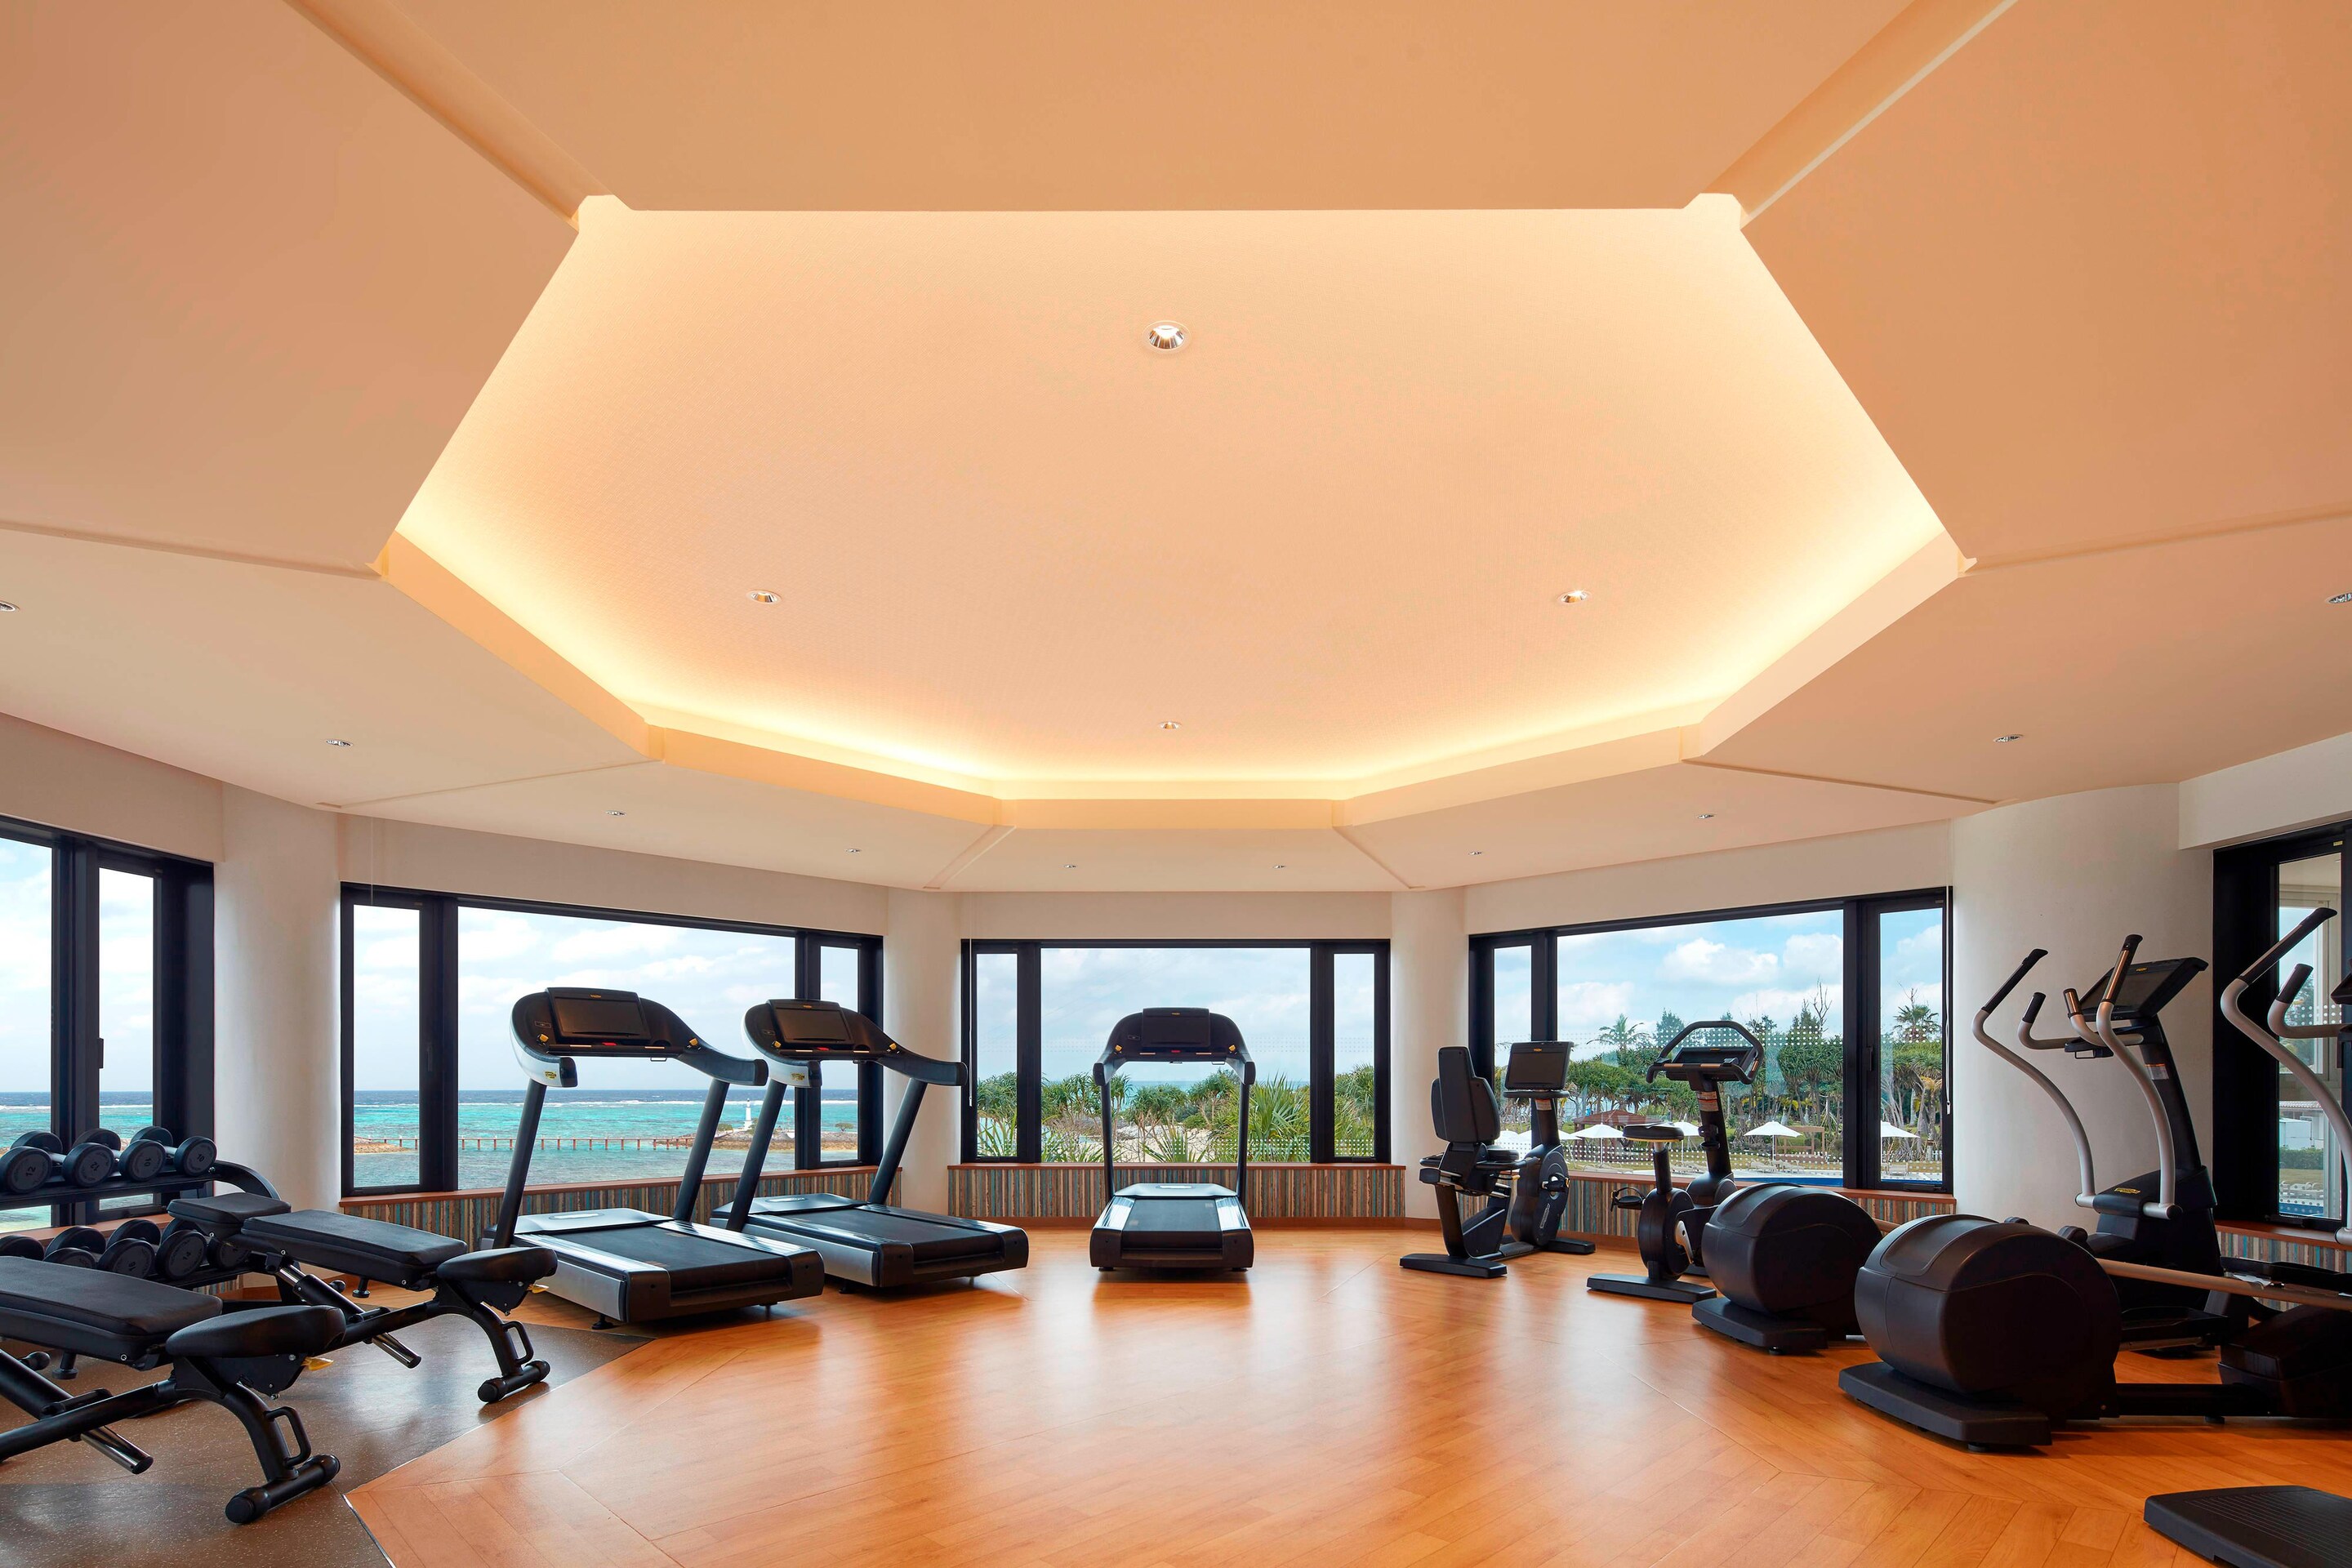 Fitness center with windows and exercise equipment